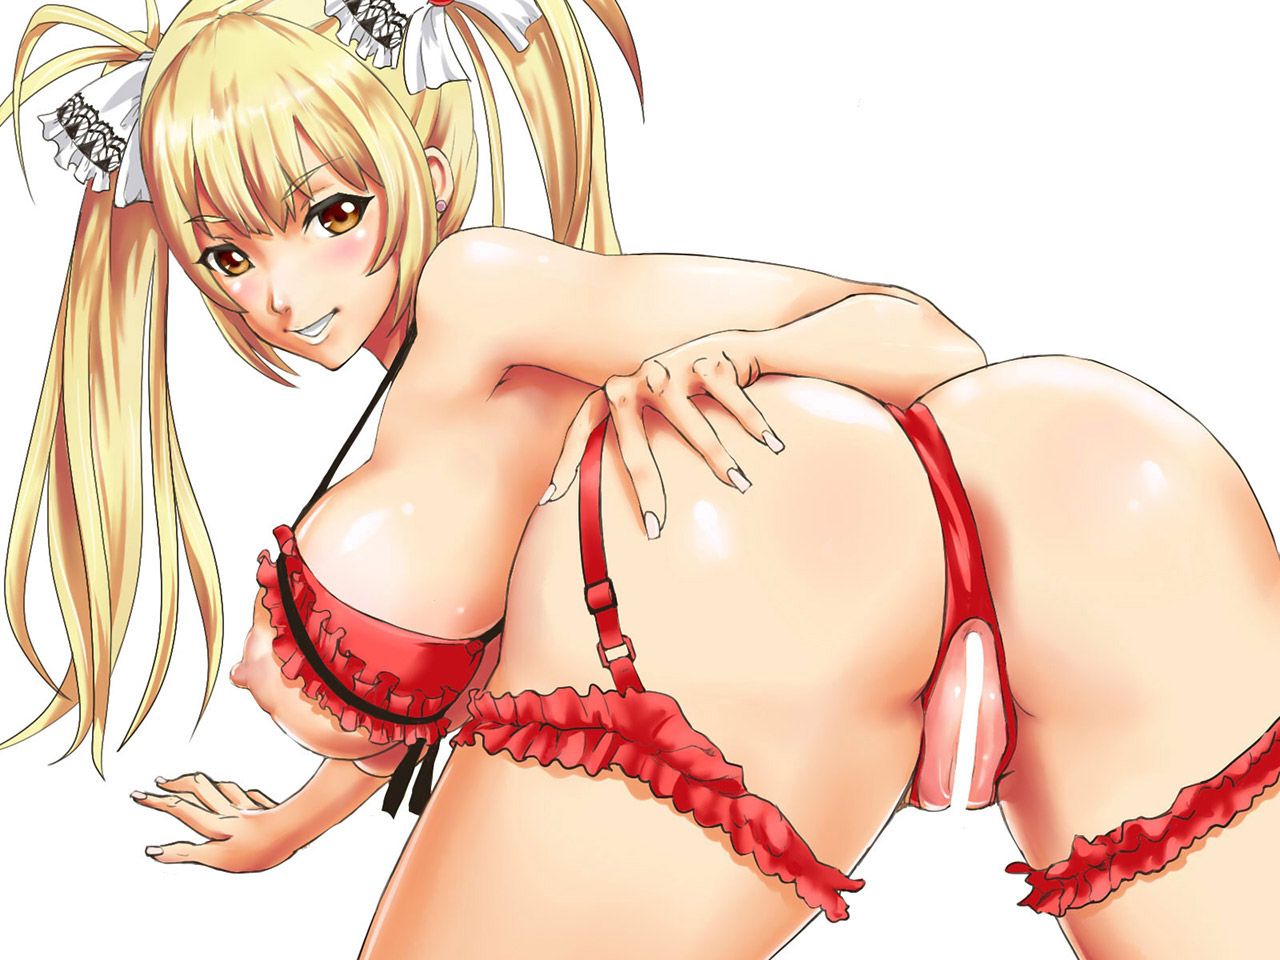 2D Erotic image summary that has a figure while shaking the twin tail 42 sheets 28